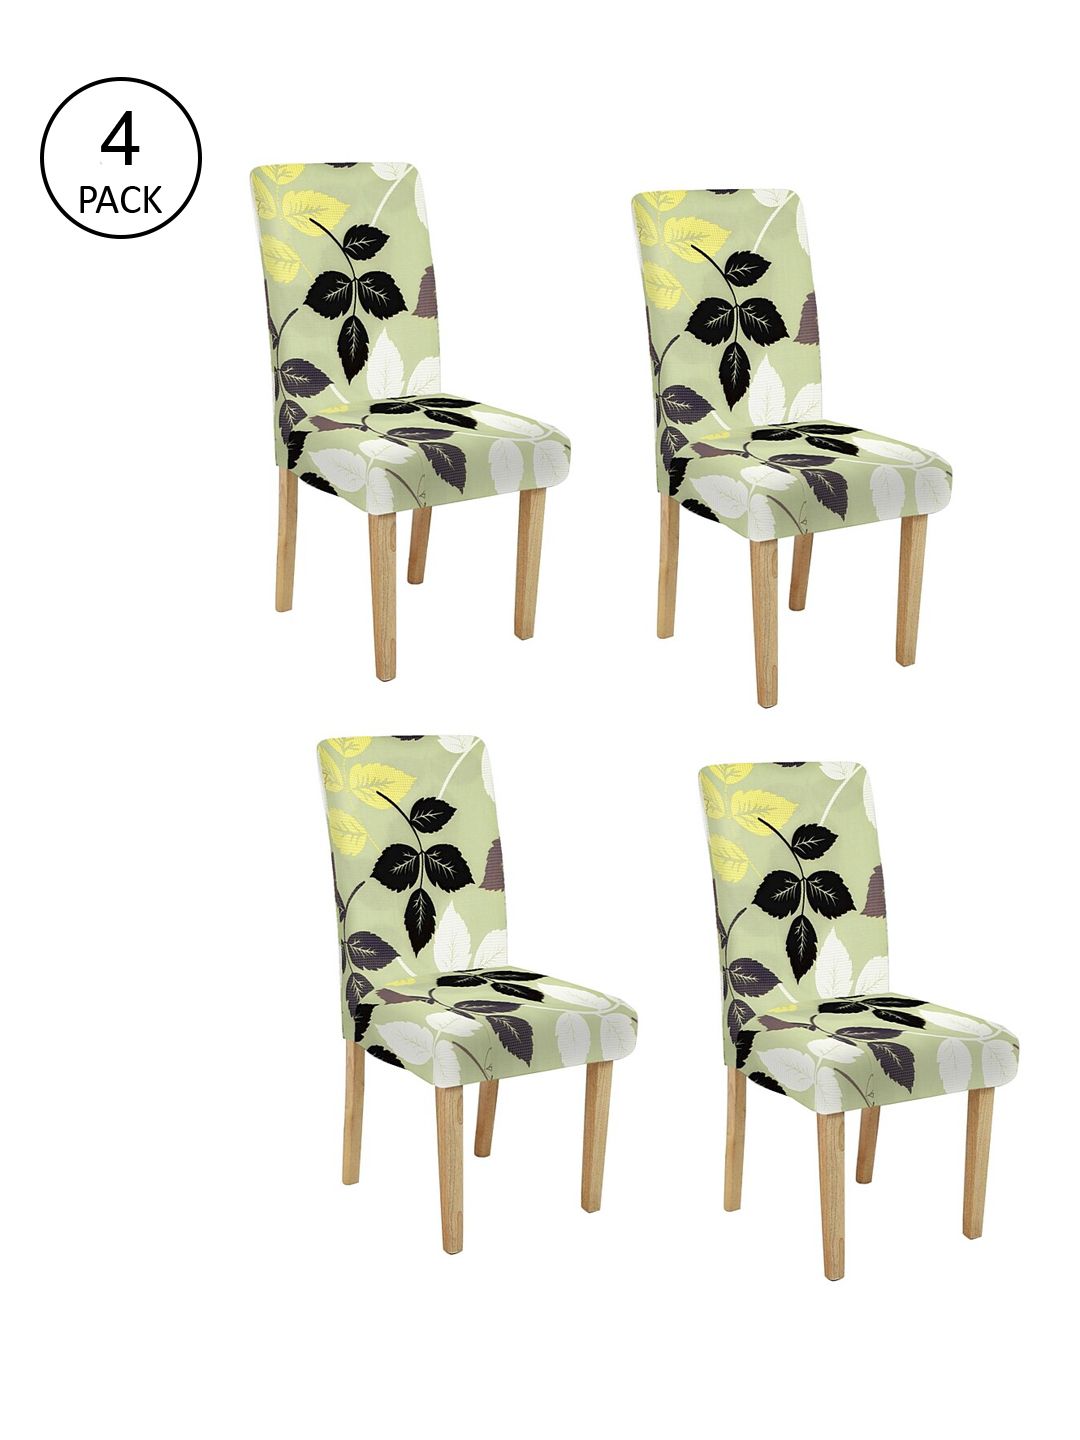 Cortina Set Of 4 Green & Black Printed Chair Covers Price in India